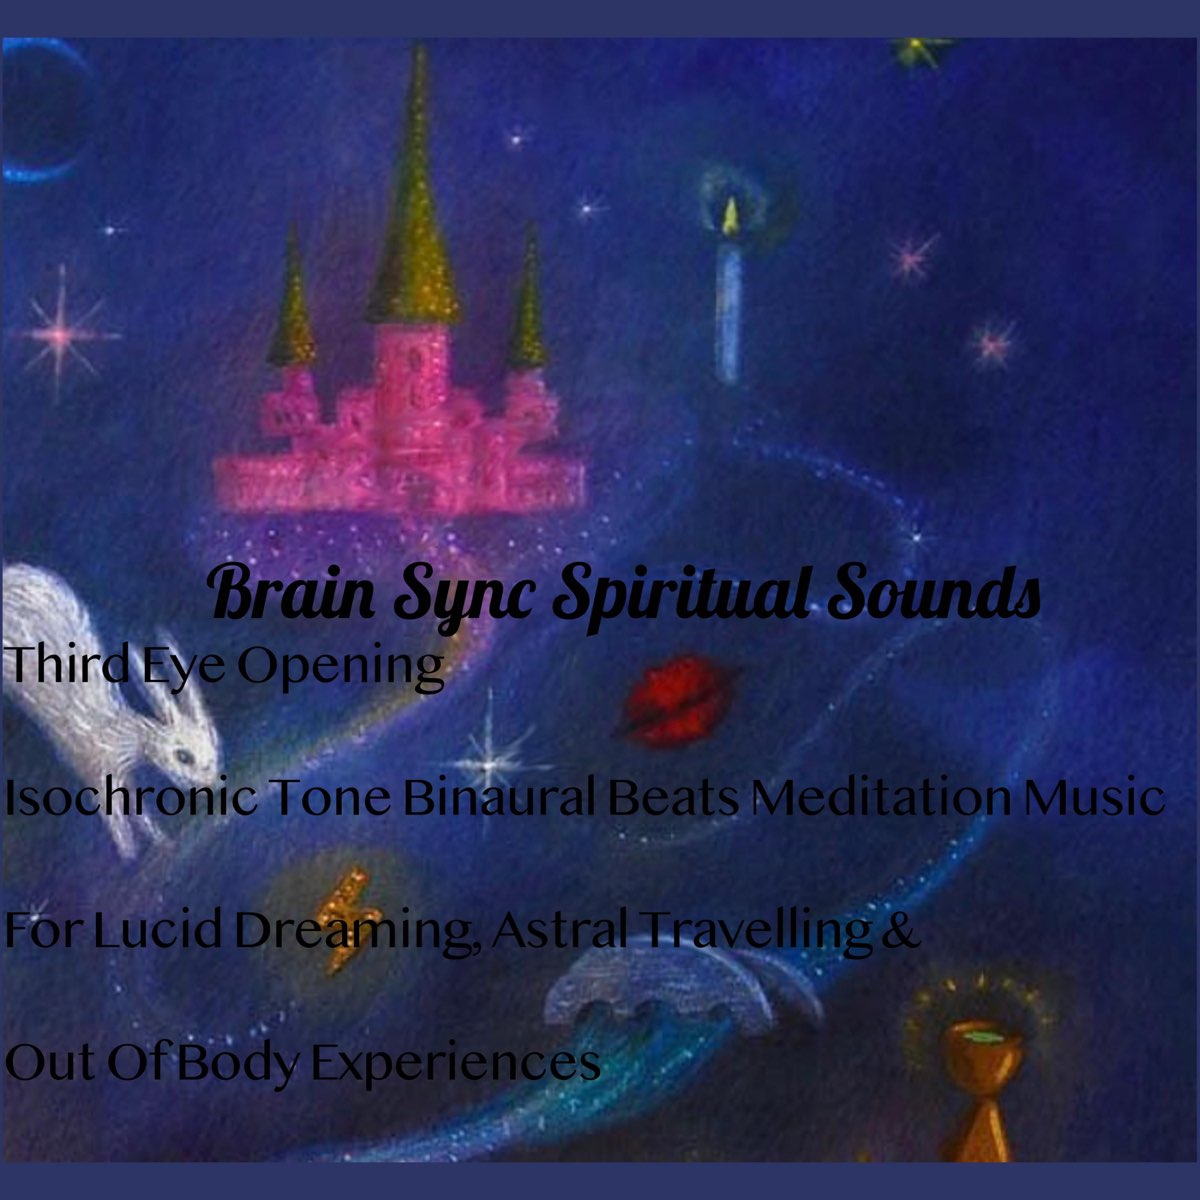 Third Eye Opening Isochronic Tones Meditation Music for Lucid Dreaming,  Astral Travelling and Out of Body Experiences Hour Long de Brain Sync  Spiritual Sounds en Apple Music